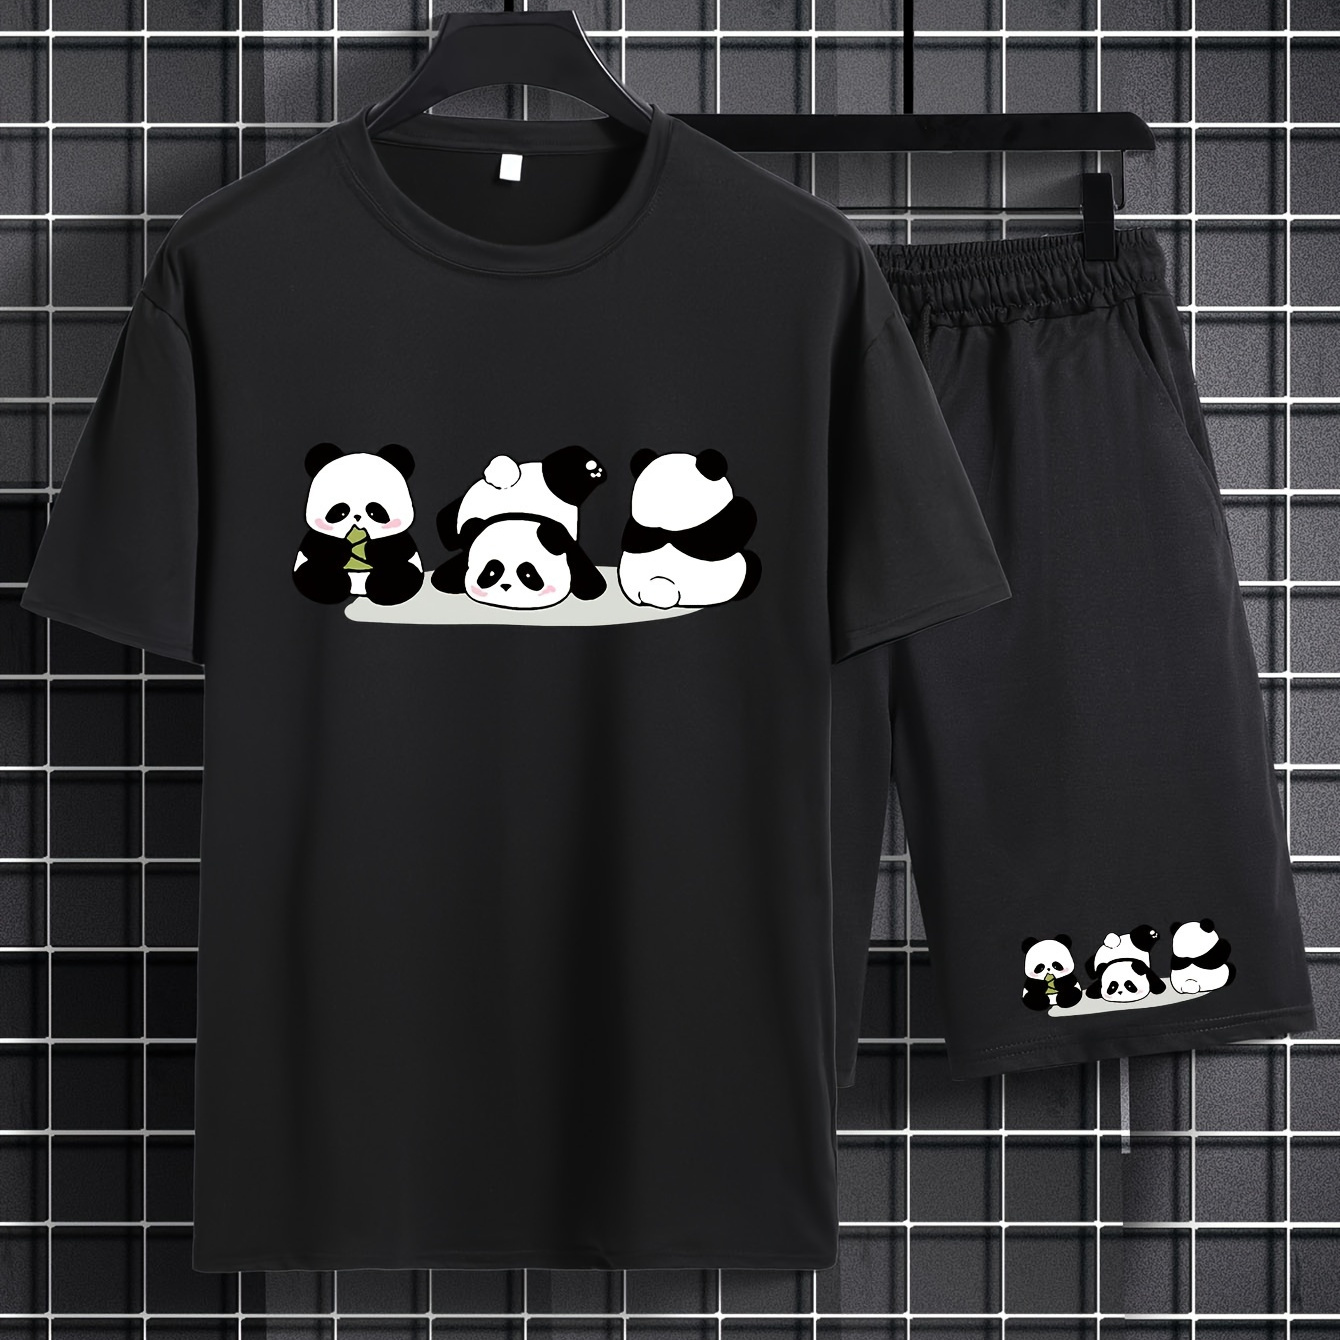 

Cute Pandas Graphic Print, 2pcs Trendy Outfits For Men, Men’s Casual Crew Neck Short Sleeve T-shirt And Drawstring Shorts Set For Summer, Men's Clothing For Vacation And Workout